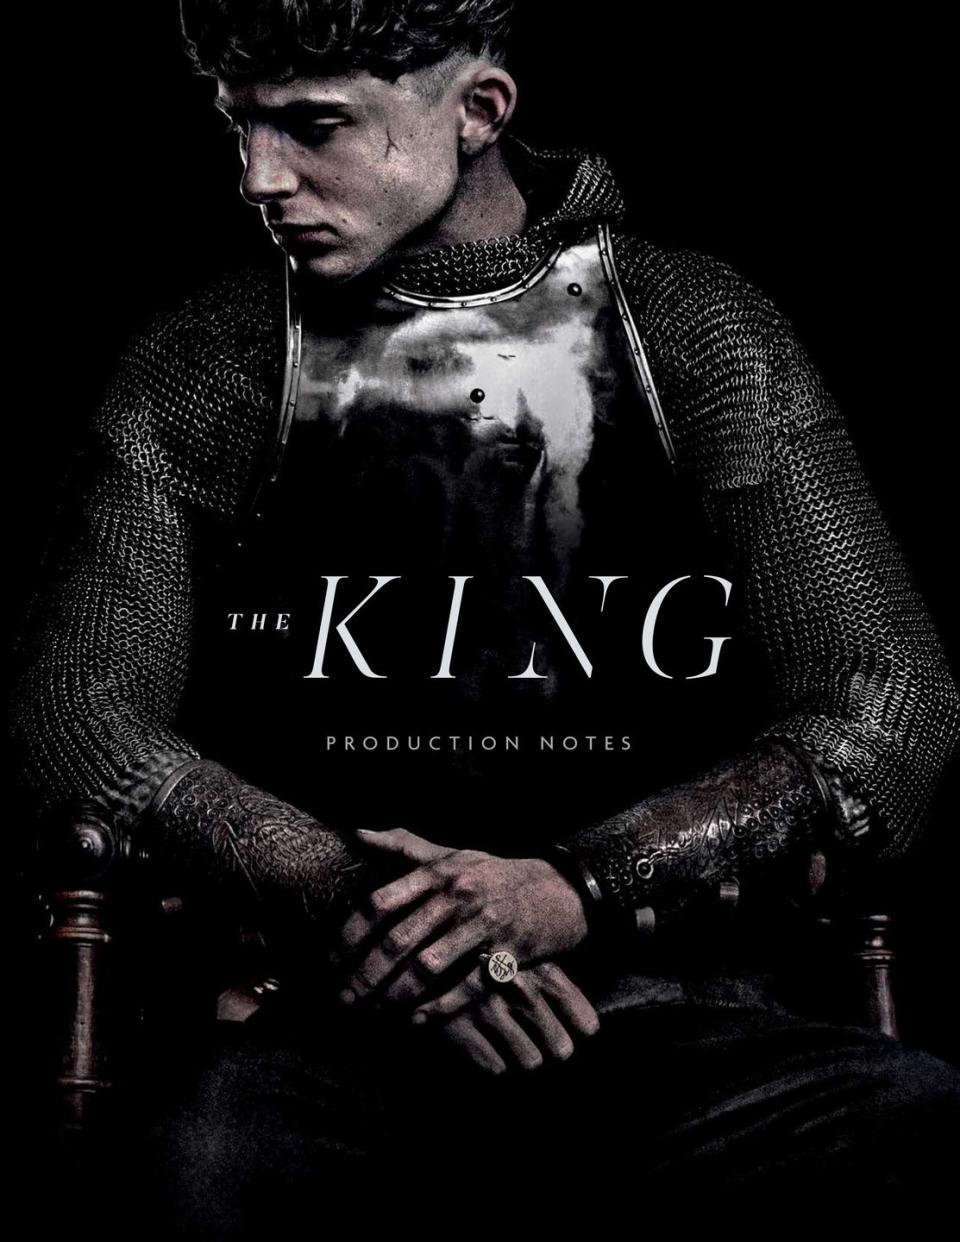 The King